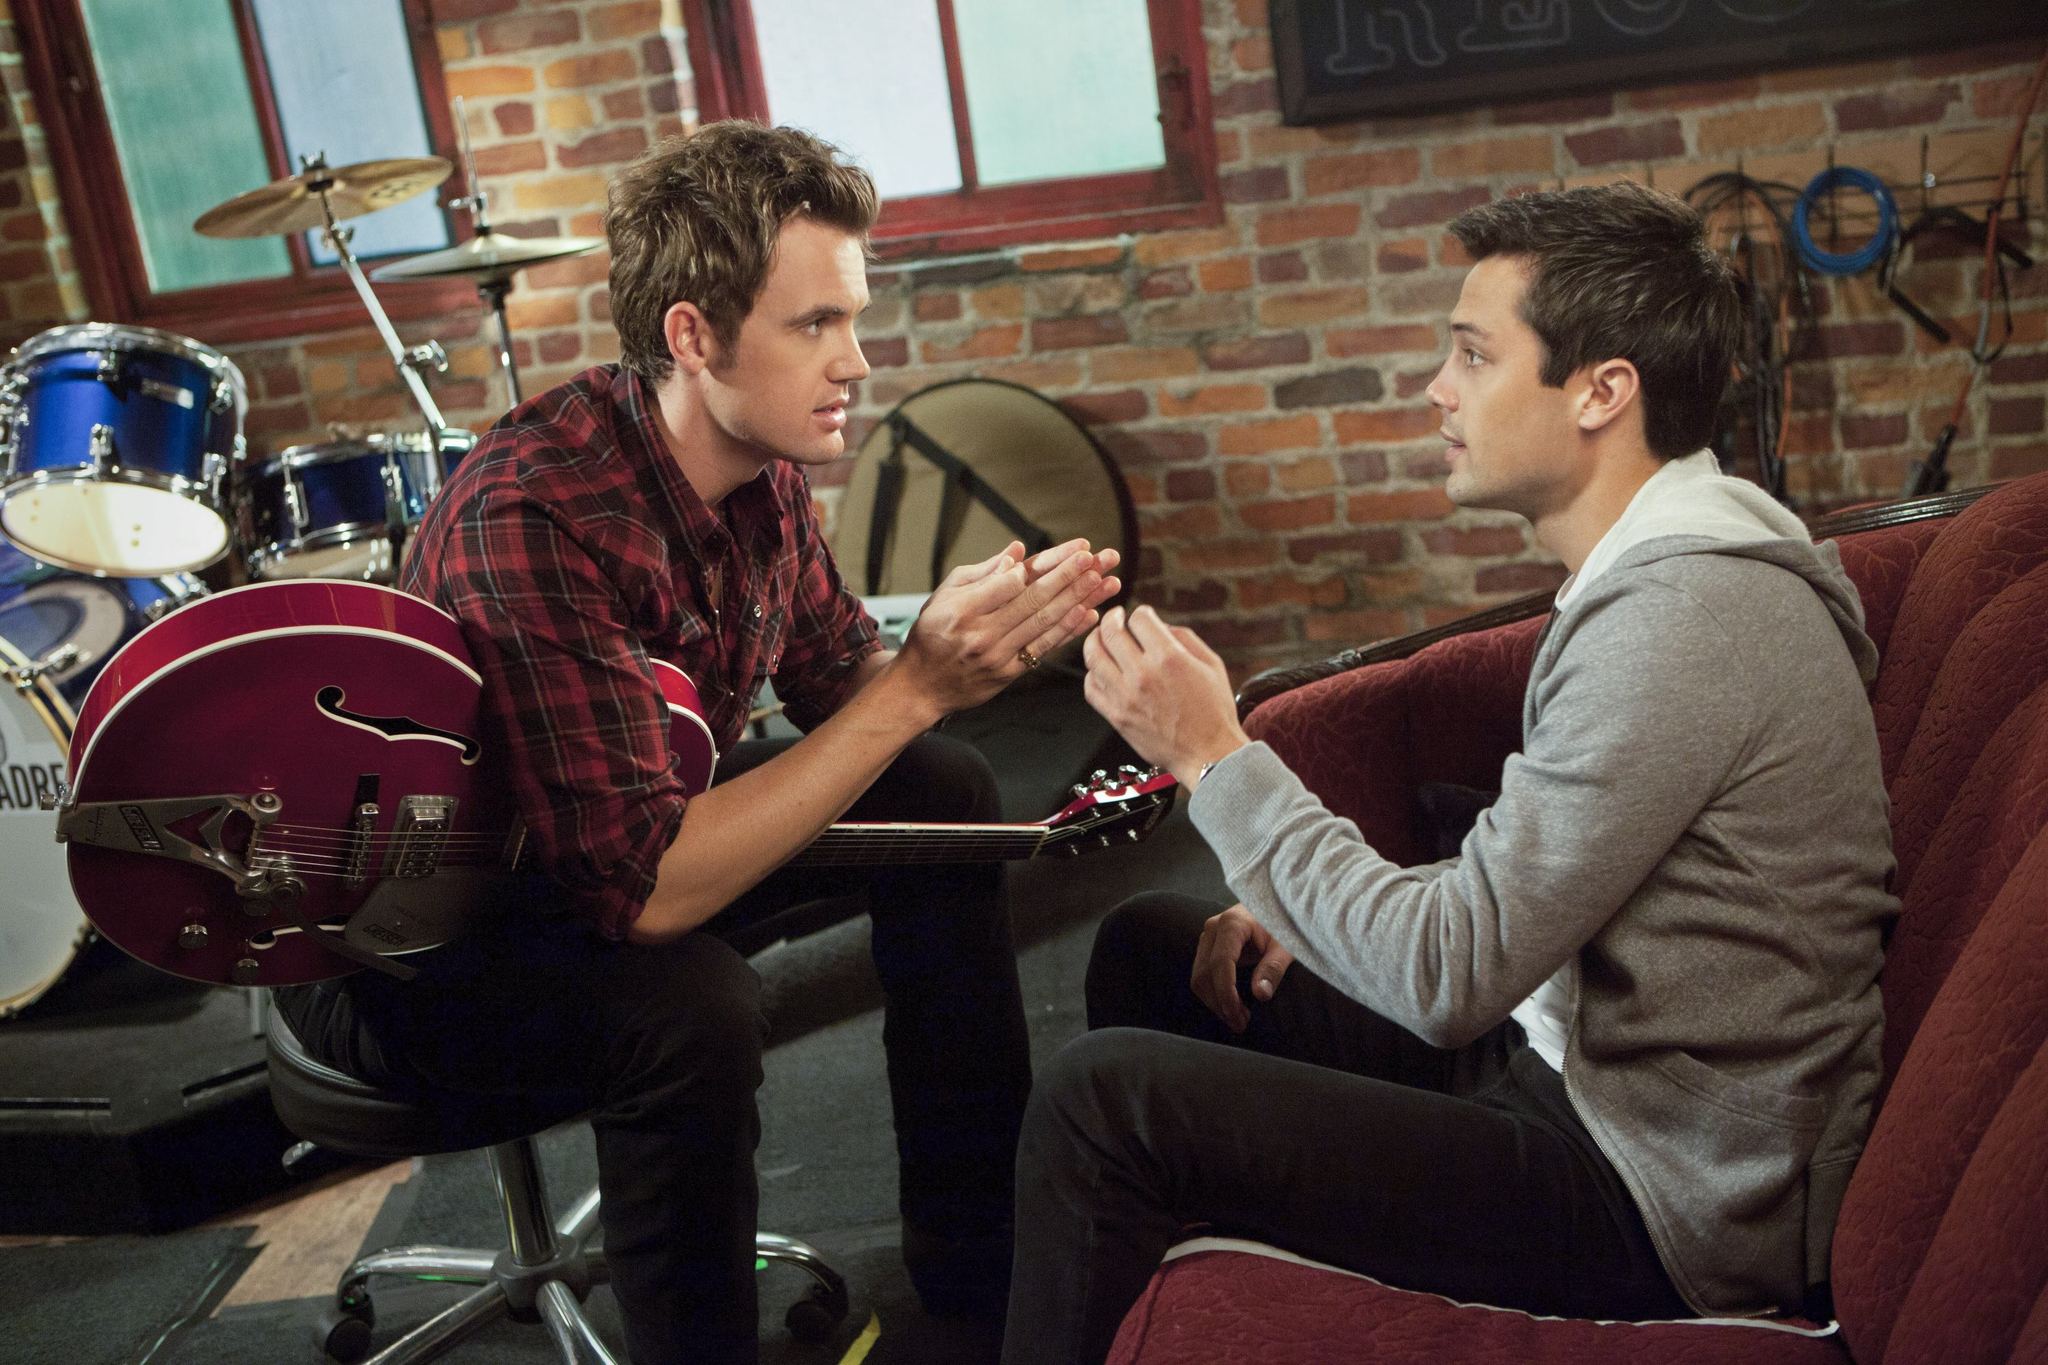 Still of Tyler Hilton and Stephen Colletti in One Tree Hill (2003)